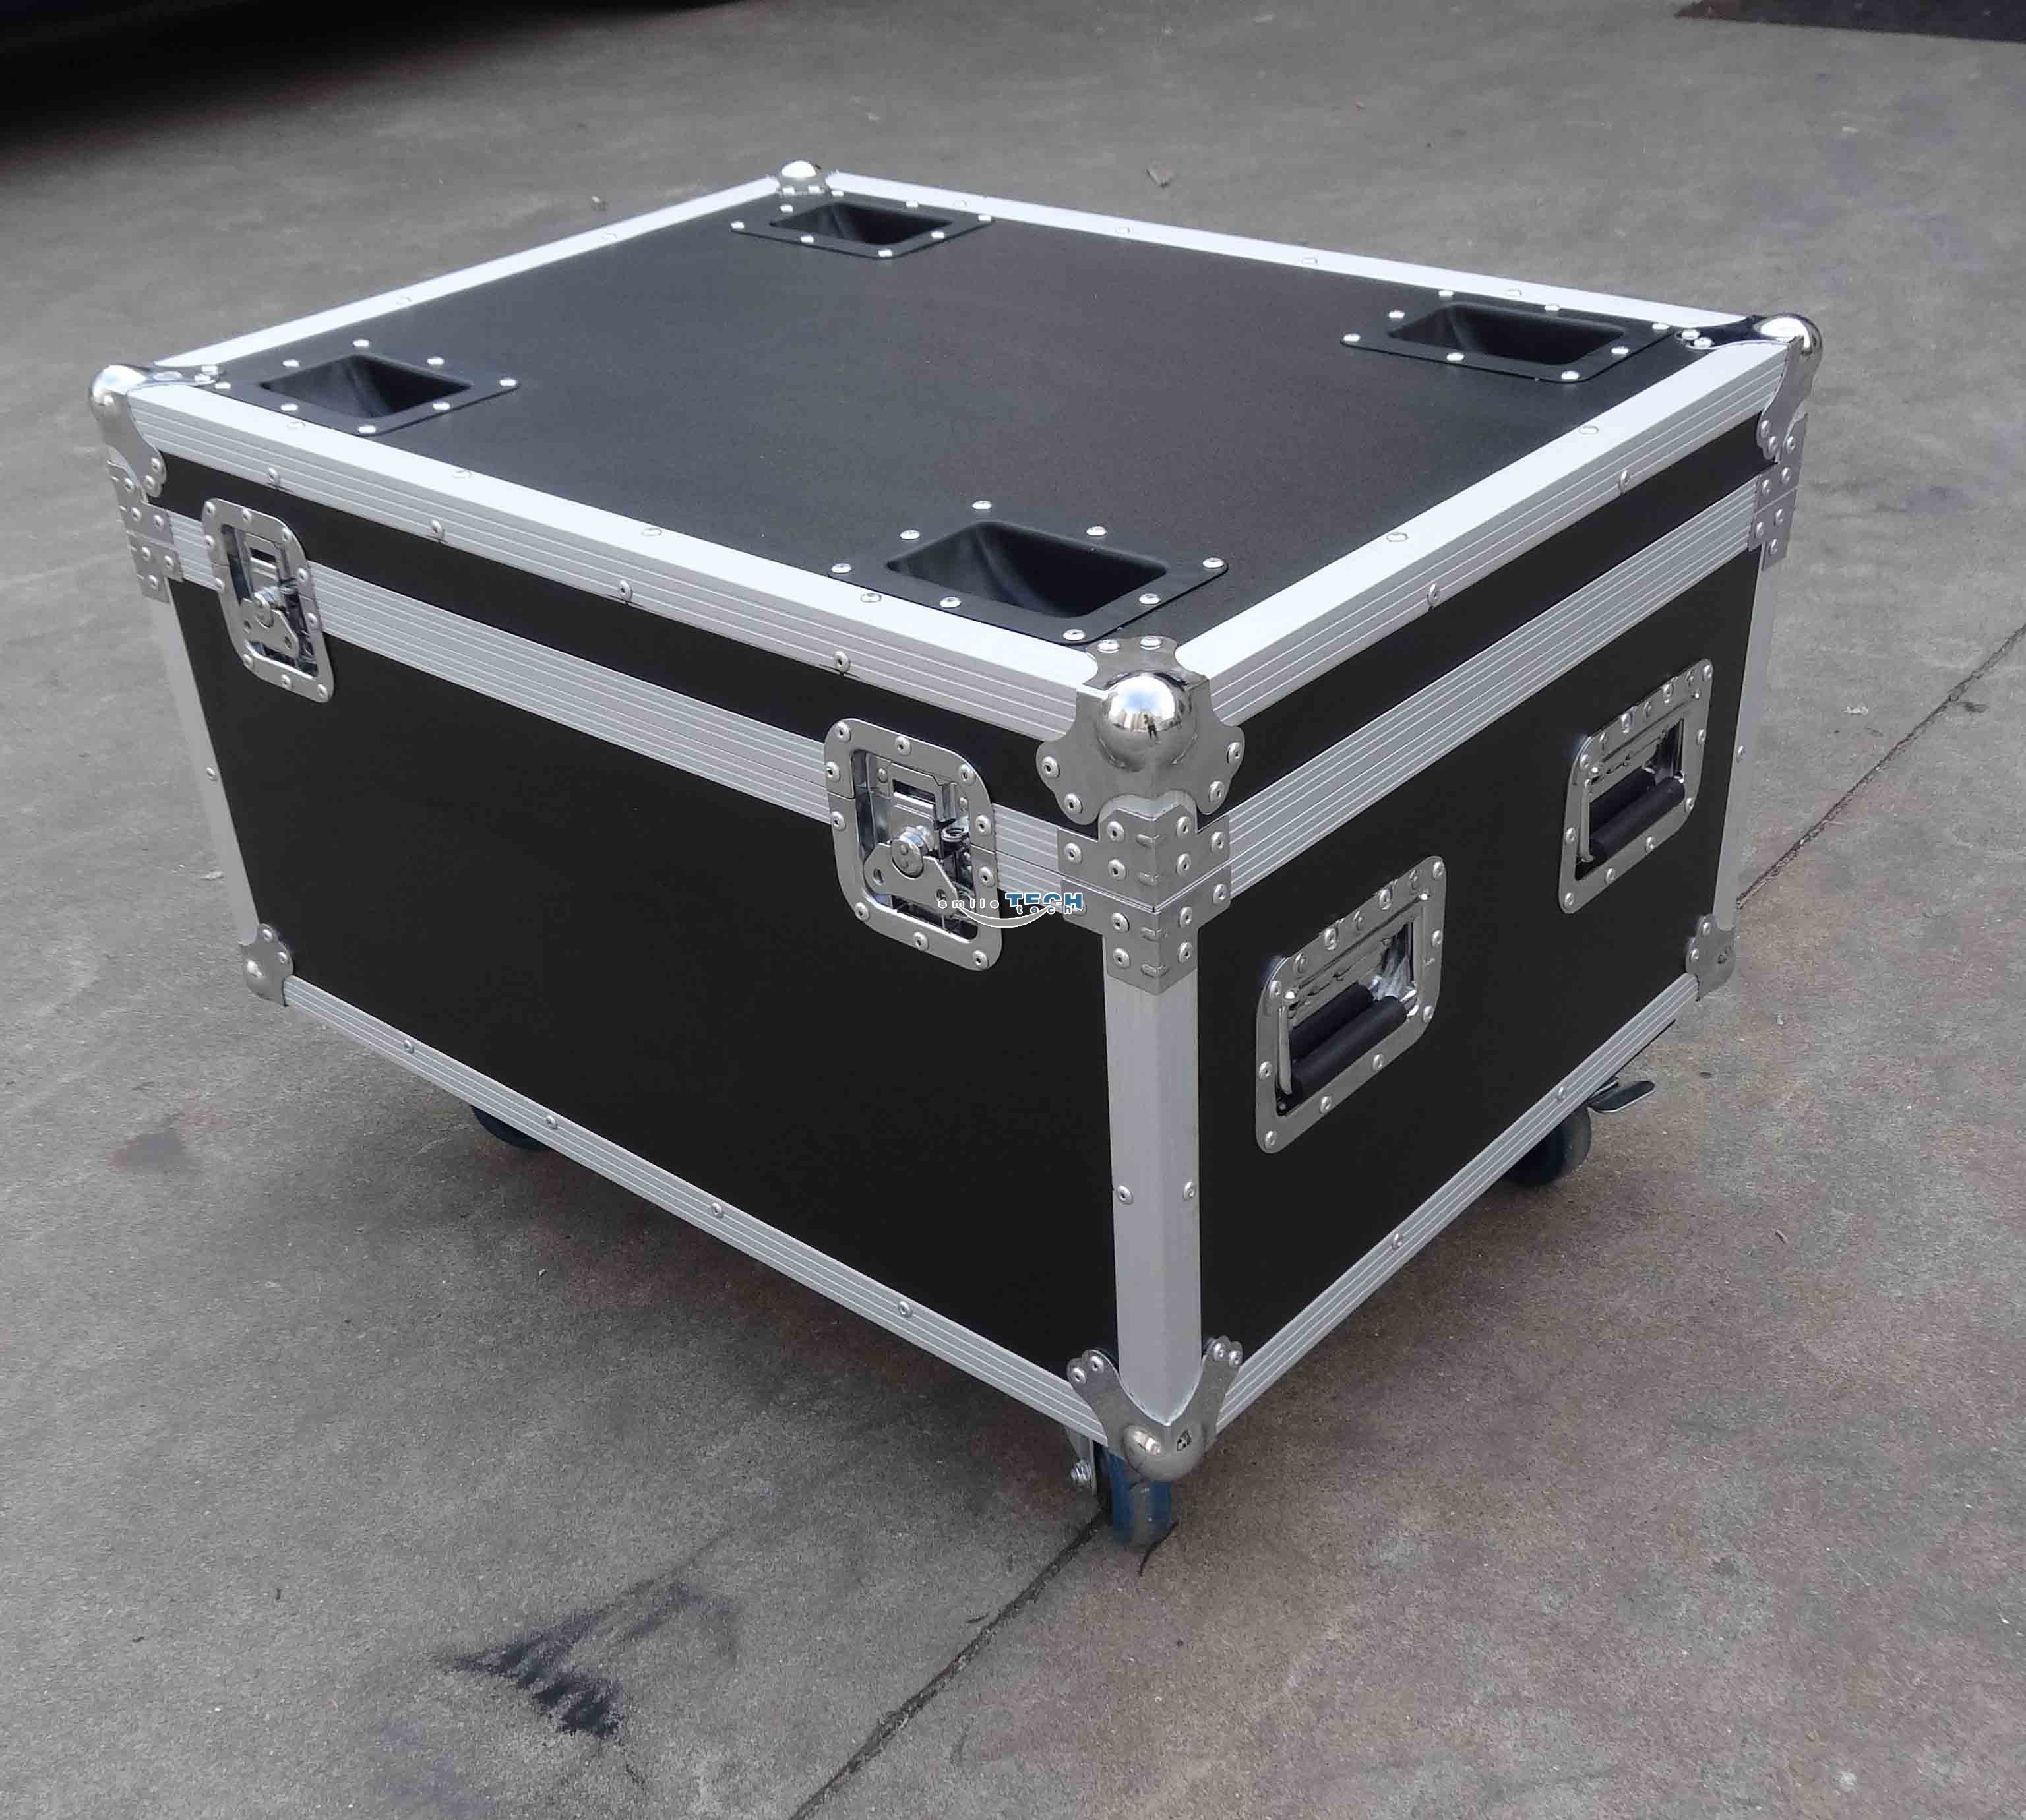 4 Way Par Can Lighting Flight Case with Storage Compartment 